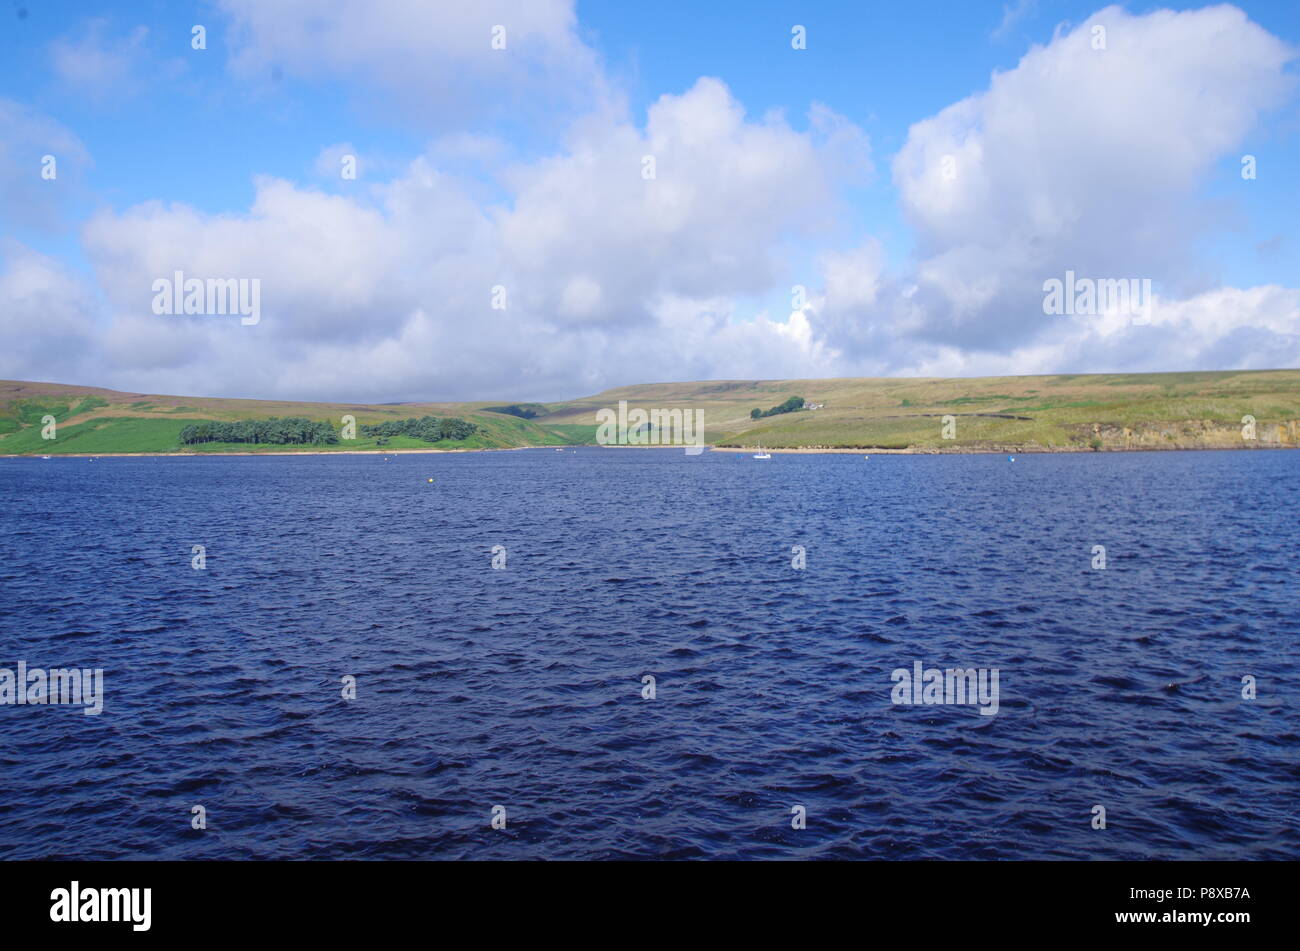 Winscar Reservoir. John o' groats (Duncansby head) to lands end. End to end trail. Dunford Bridge. South Yorkshire. England. UK Stock Photo